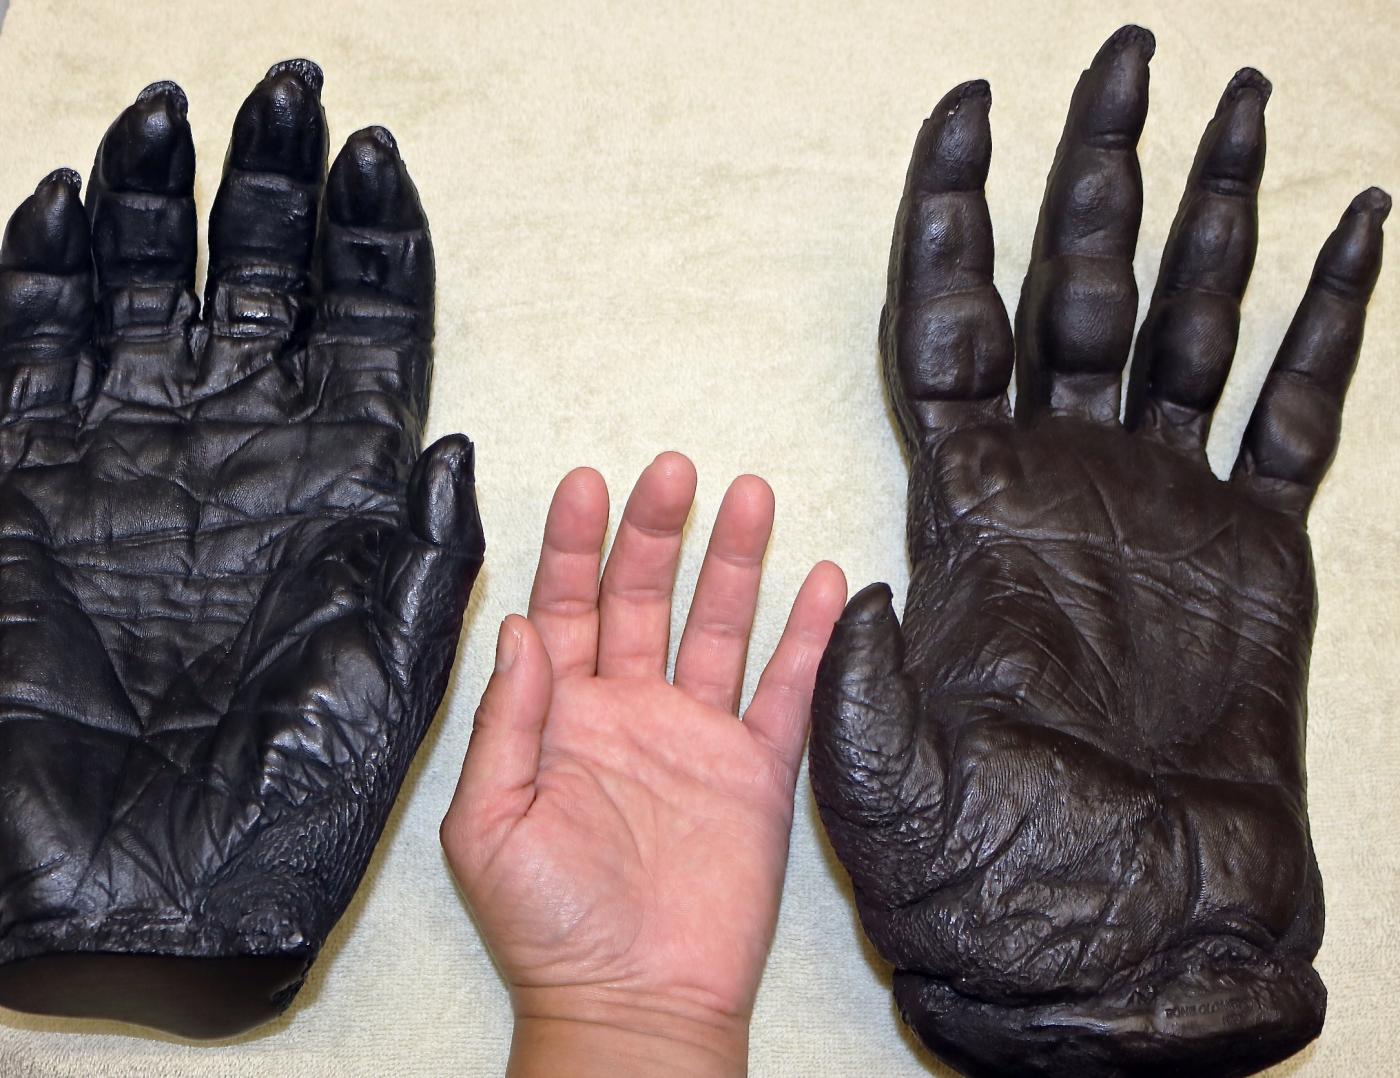 Great ape hand casts